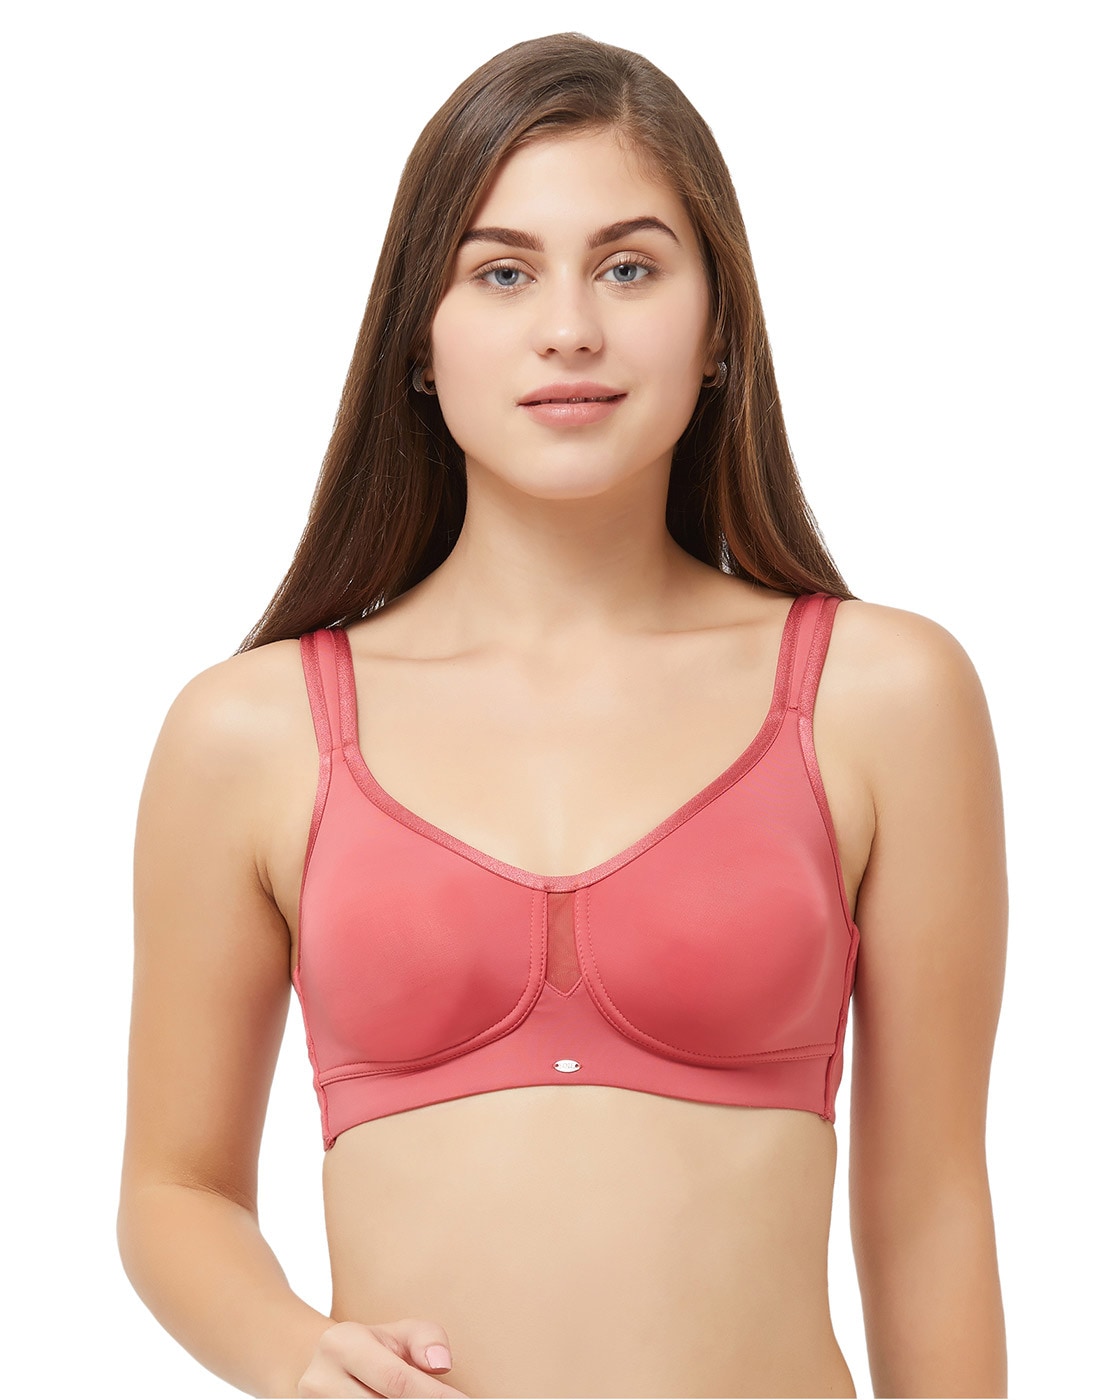 Soie Sports Bras for Women sale - discounted price